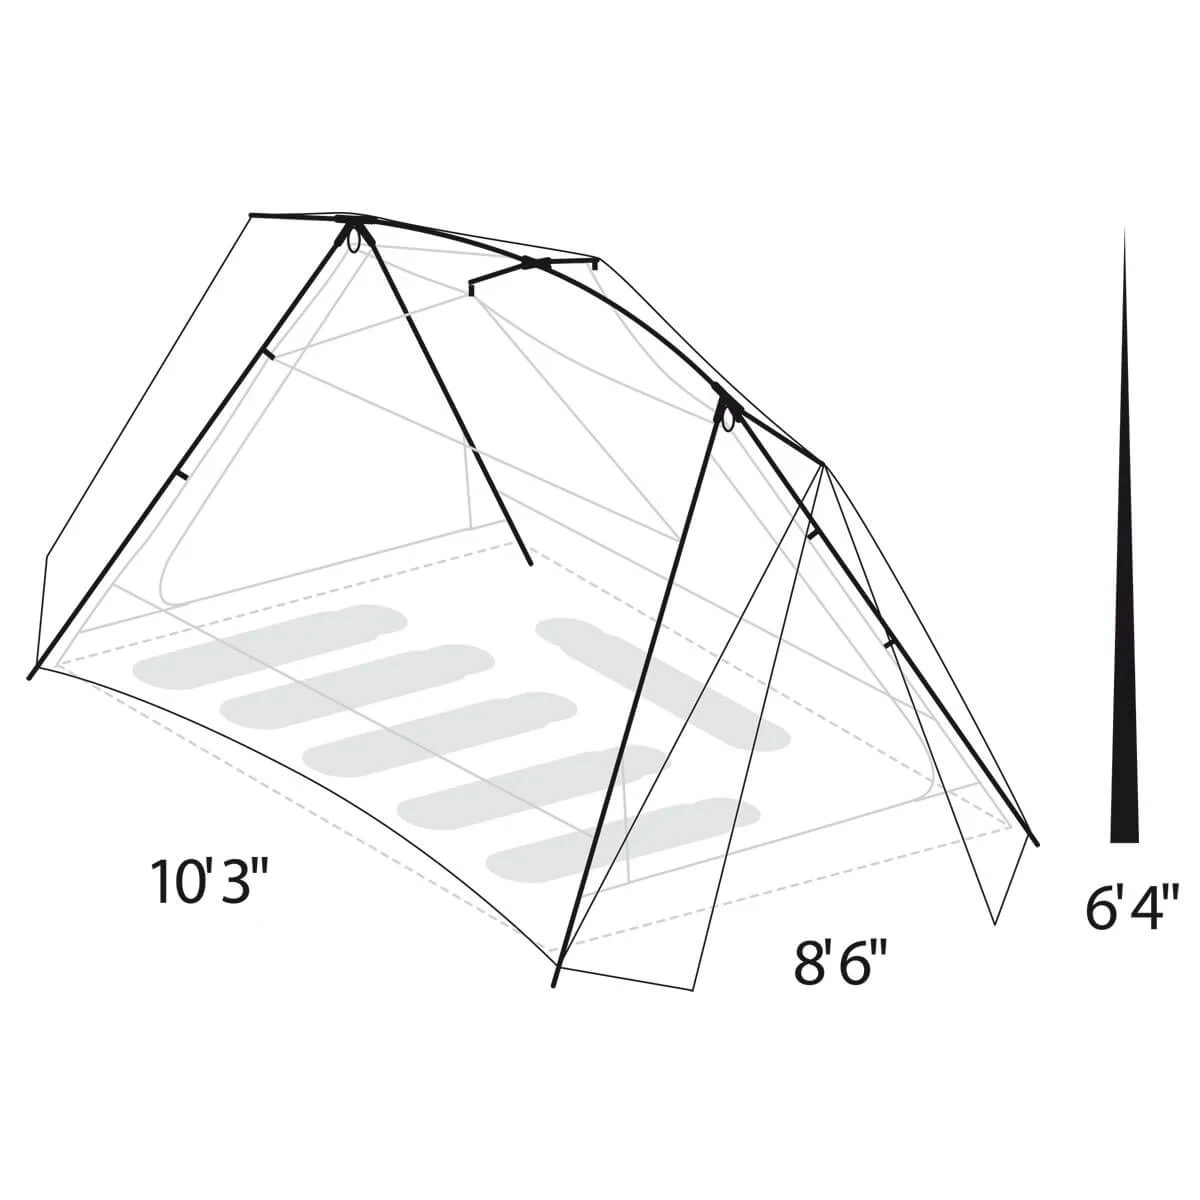 Timberline SQ Outfitter 6 person tent spec diagram